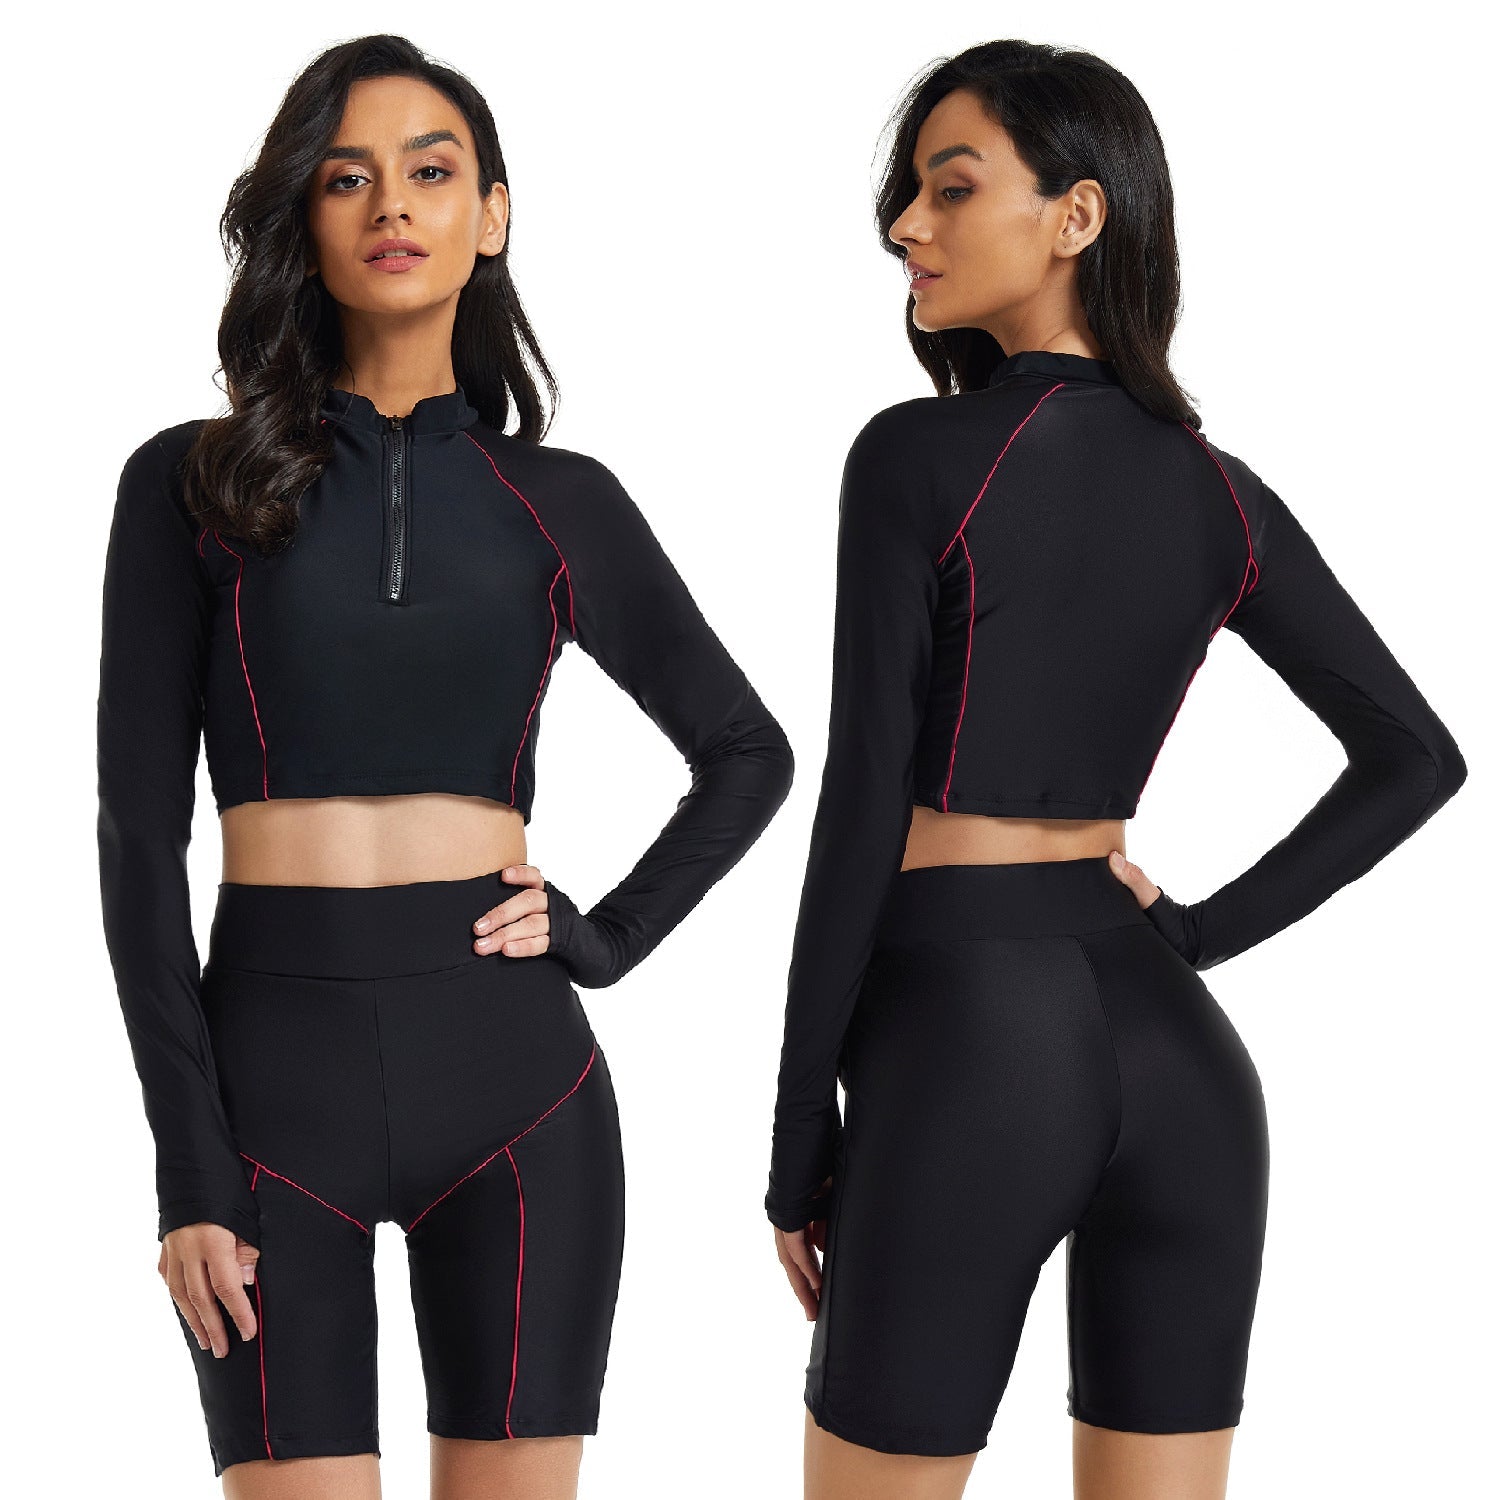 Black Zipper Surfing Wetsuits for Women-Swimwear-Free Shipping at meselling99